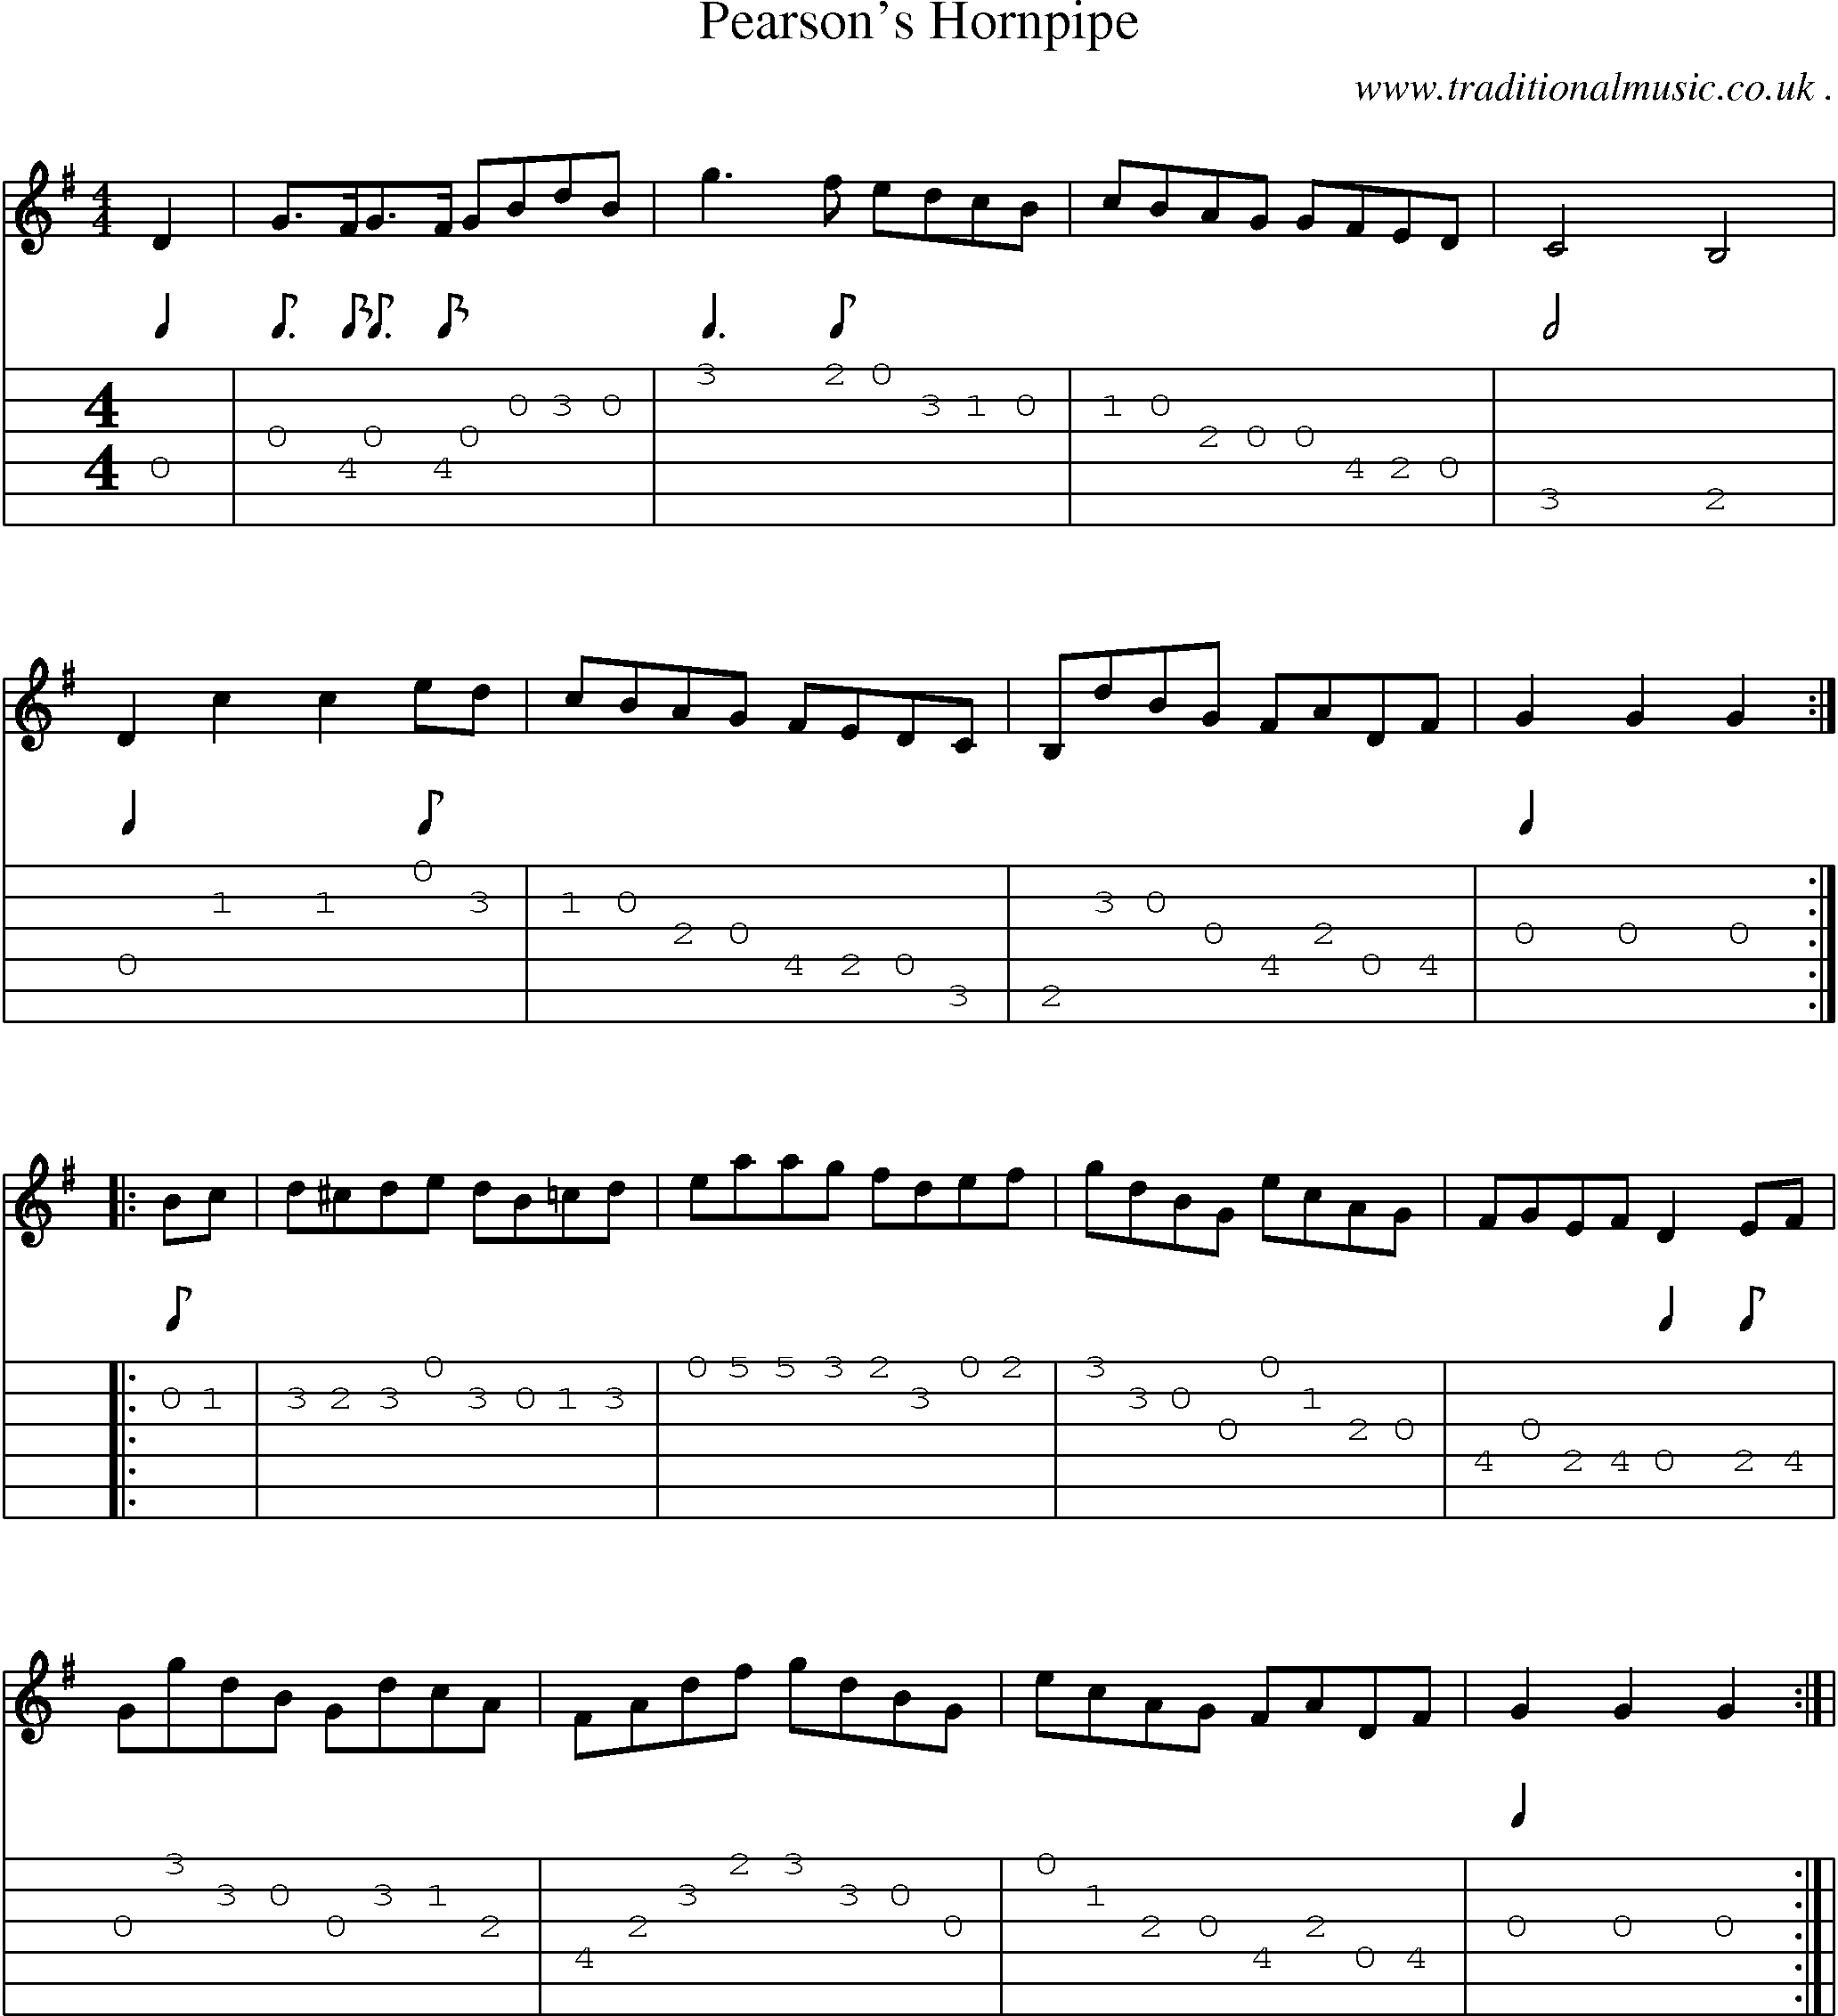 Sheet-Music and Guitar Tabs for Pearsons Hornpipe